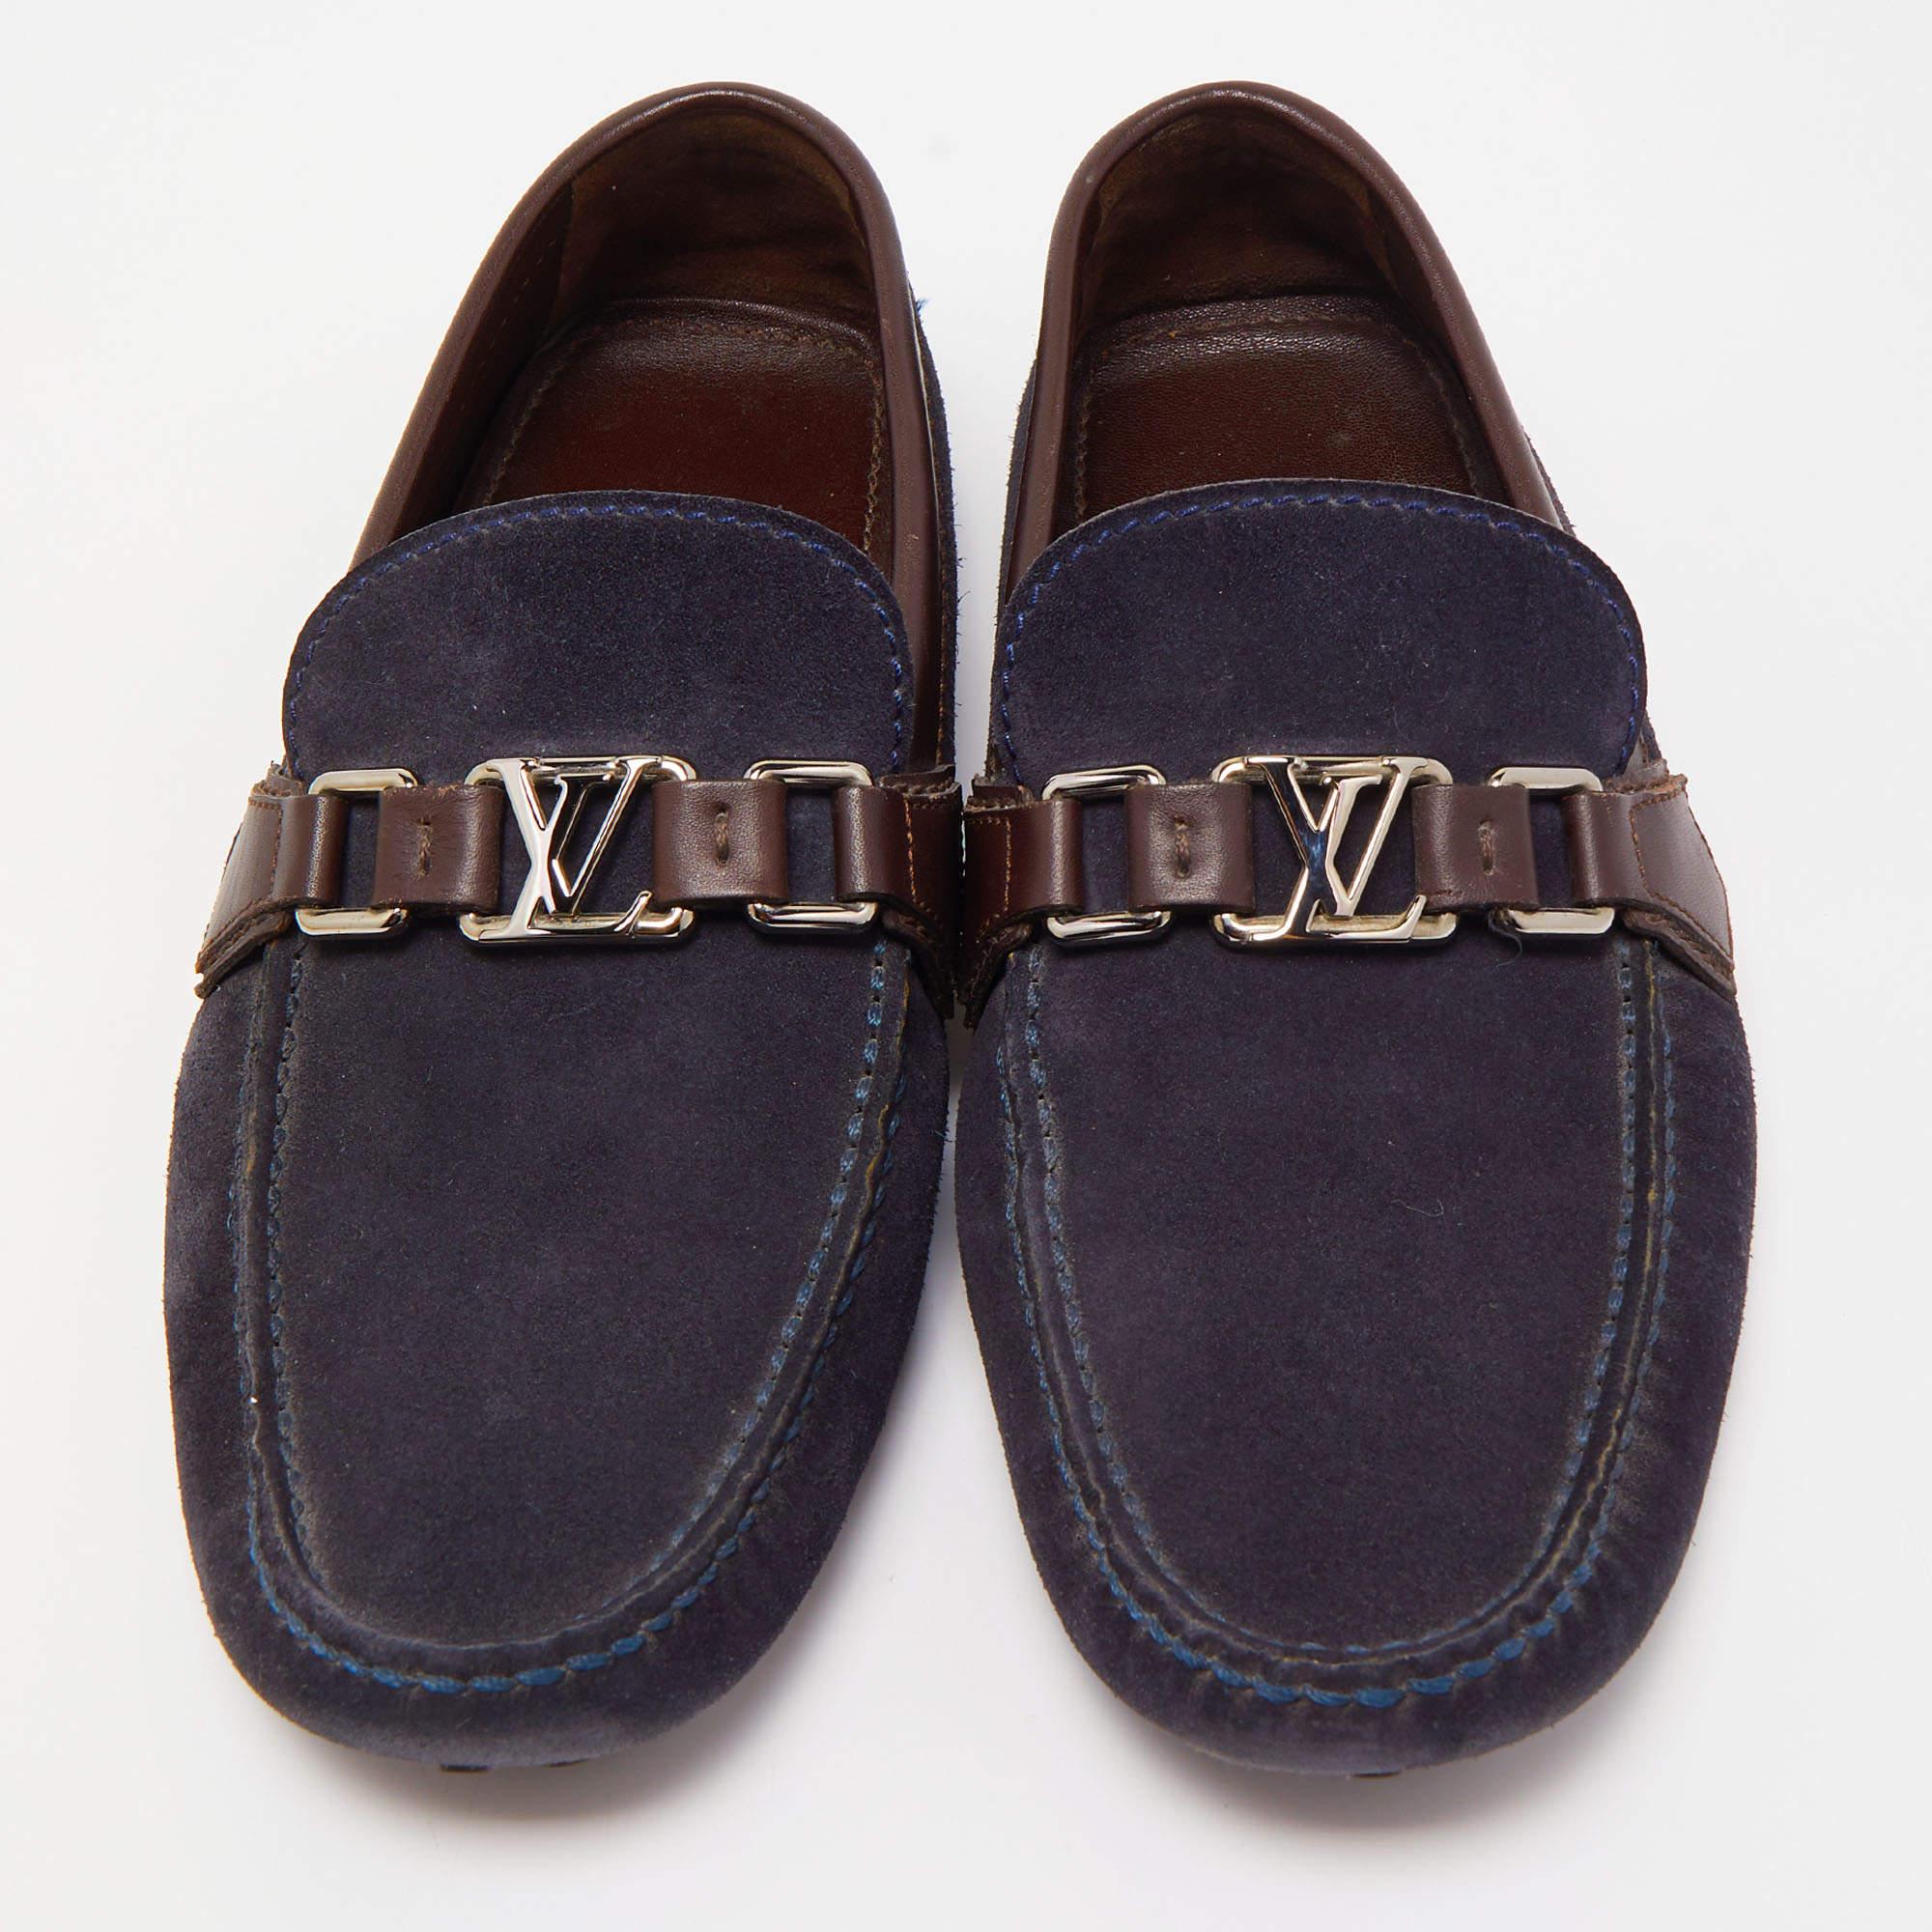 Practical, fashionable, and durable—these designer loafers are carefully built to be fine companions to your everyday style. They come made using the best materials to be a prized buy.

Includes: Original Dustbag
